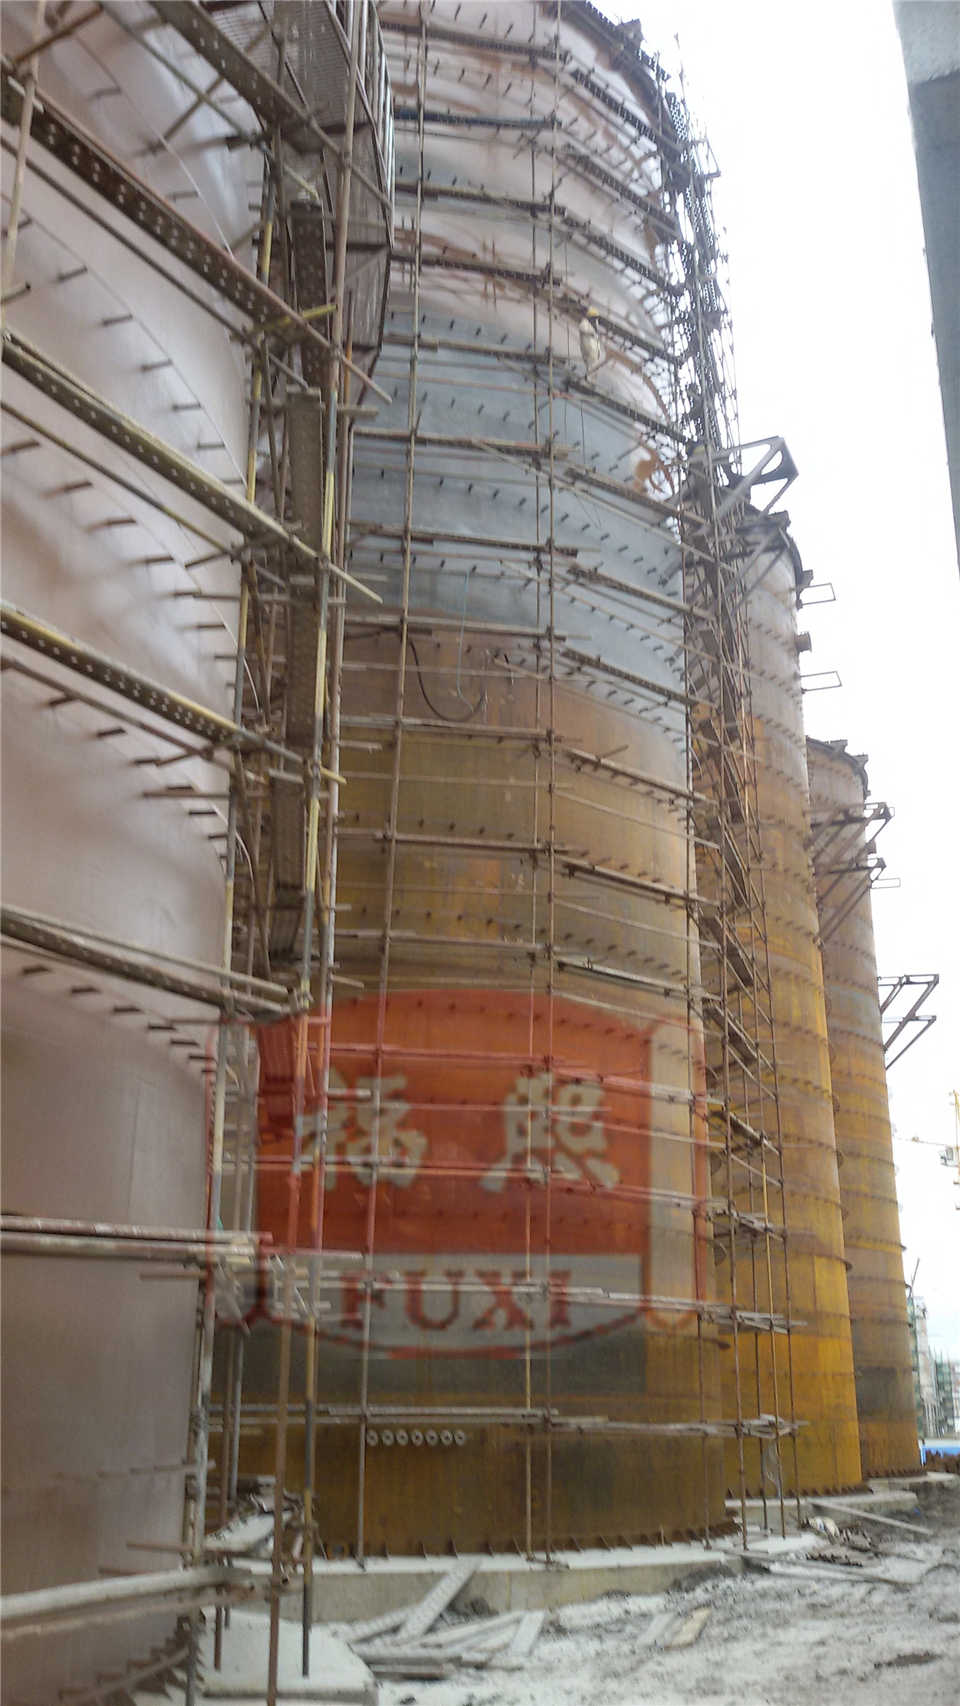 Anticorrosion construction of anaerobic tank in Russian paper mill